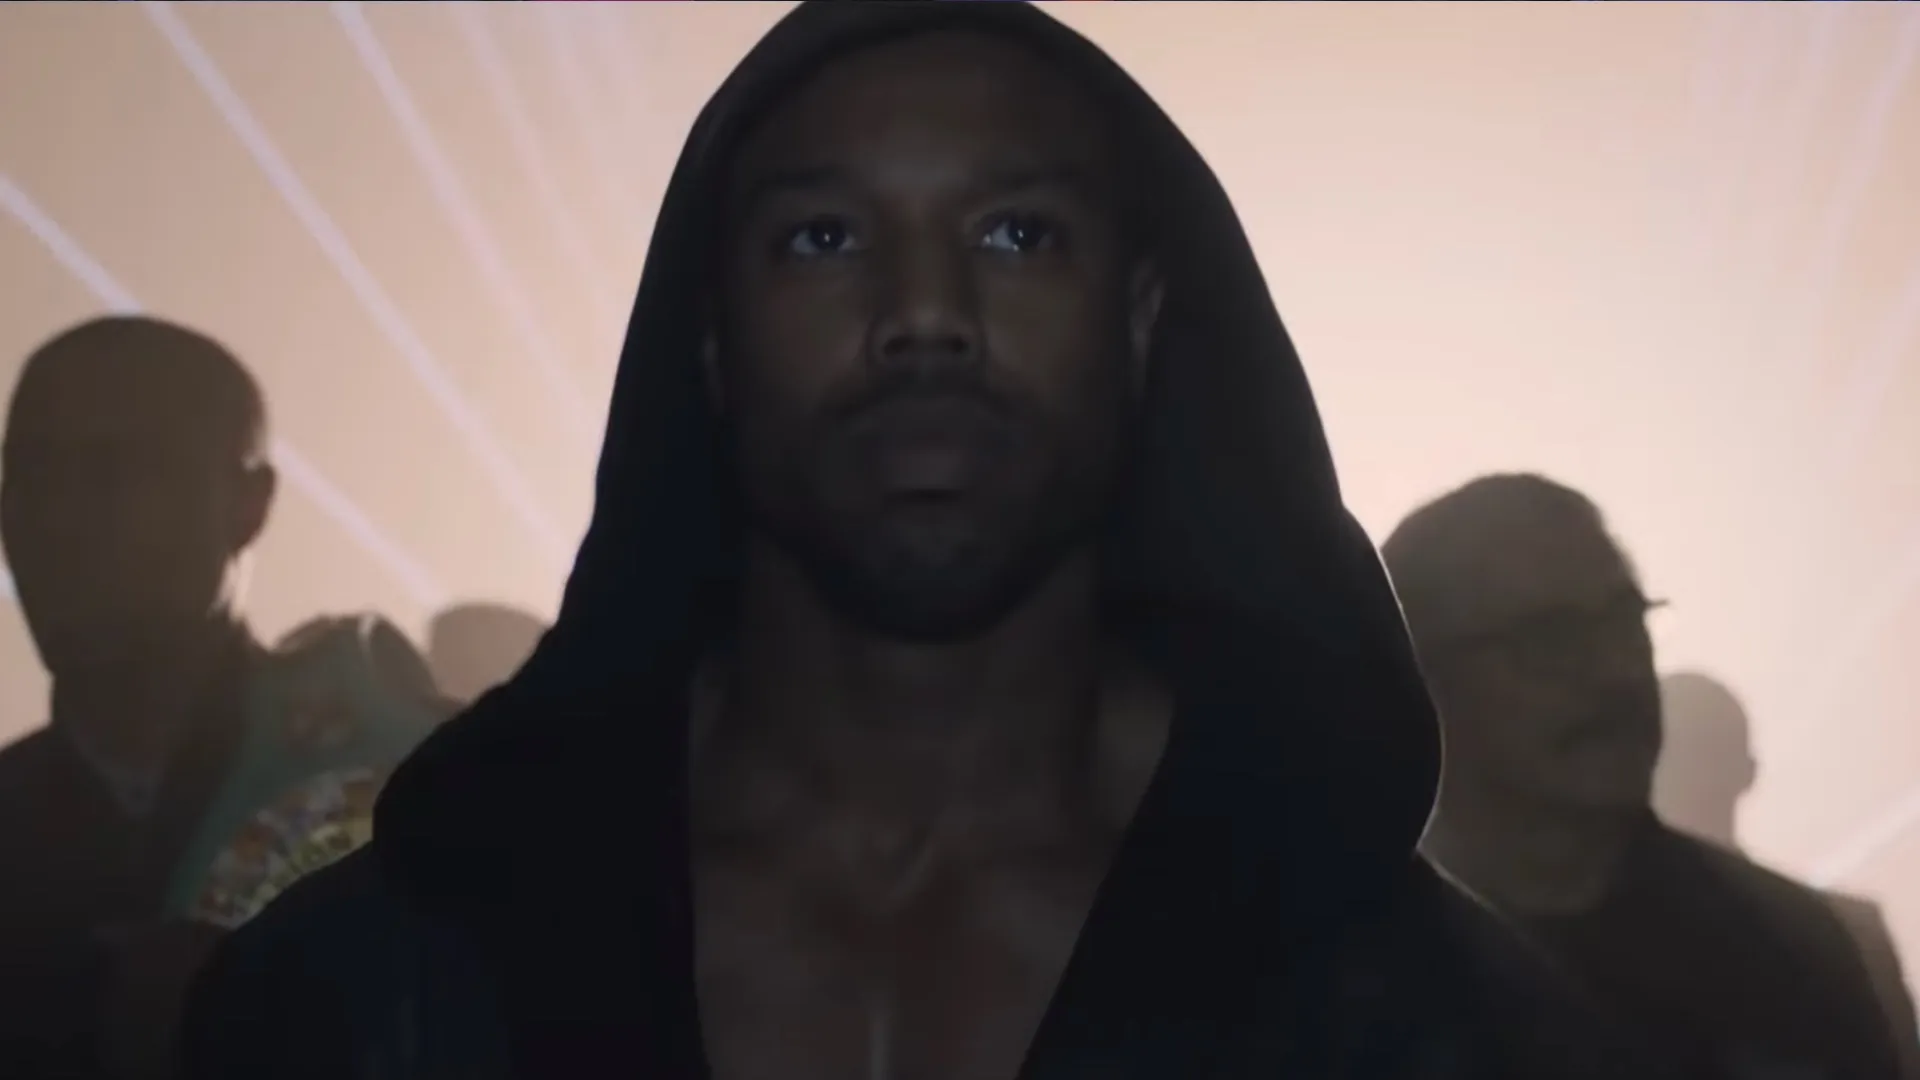 the creed ii trailer will give you chills social